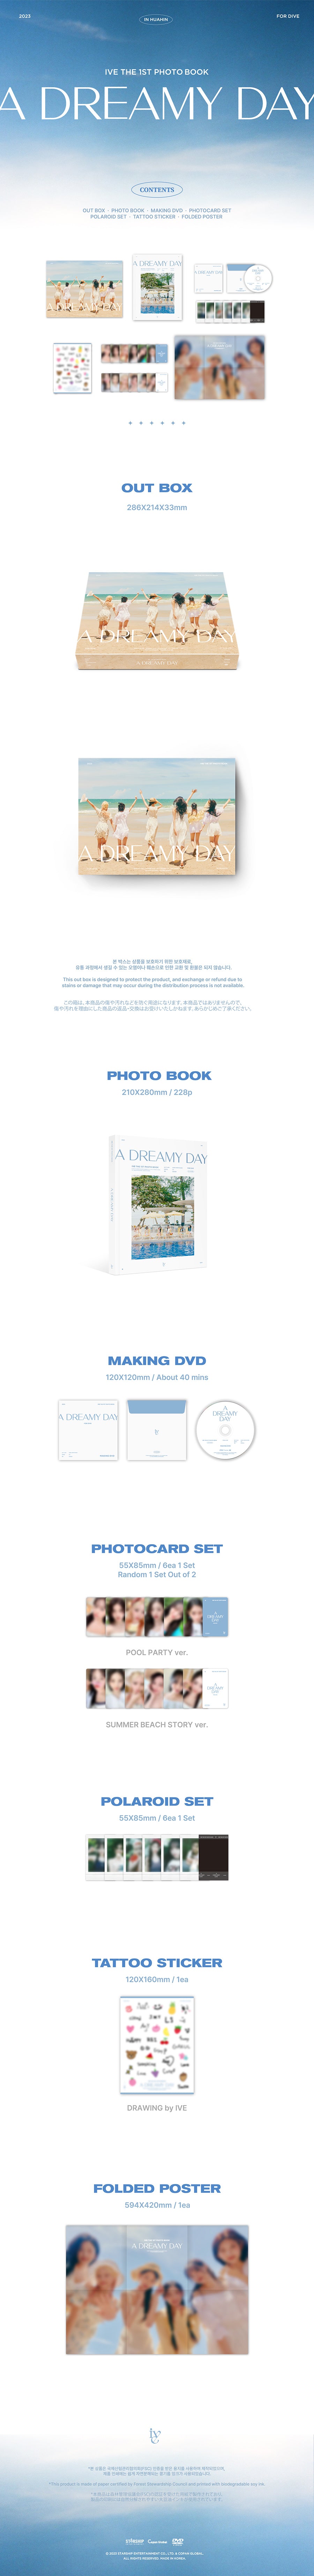 IVE 1ST PHOTOBOOK 'A DREAMY DAY' DETAIL